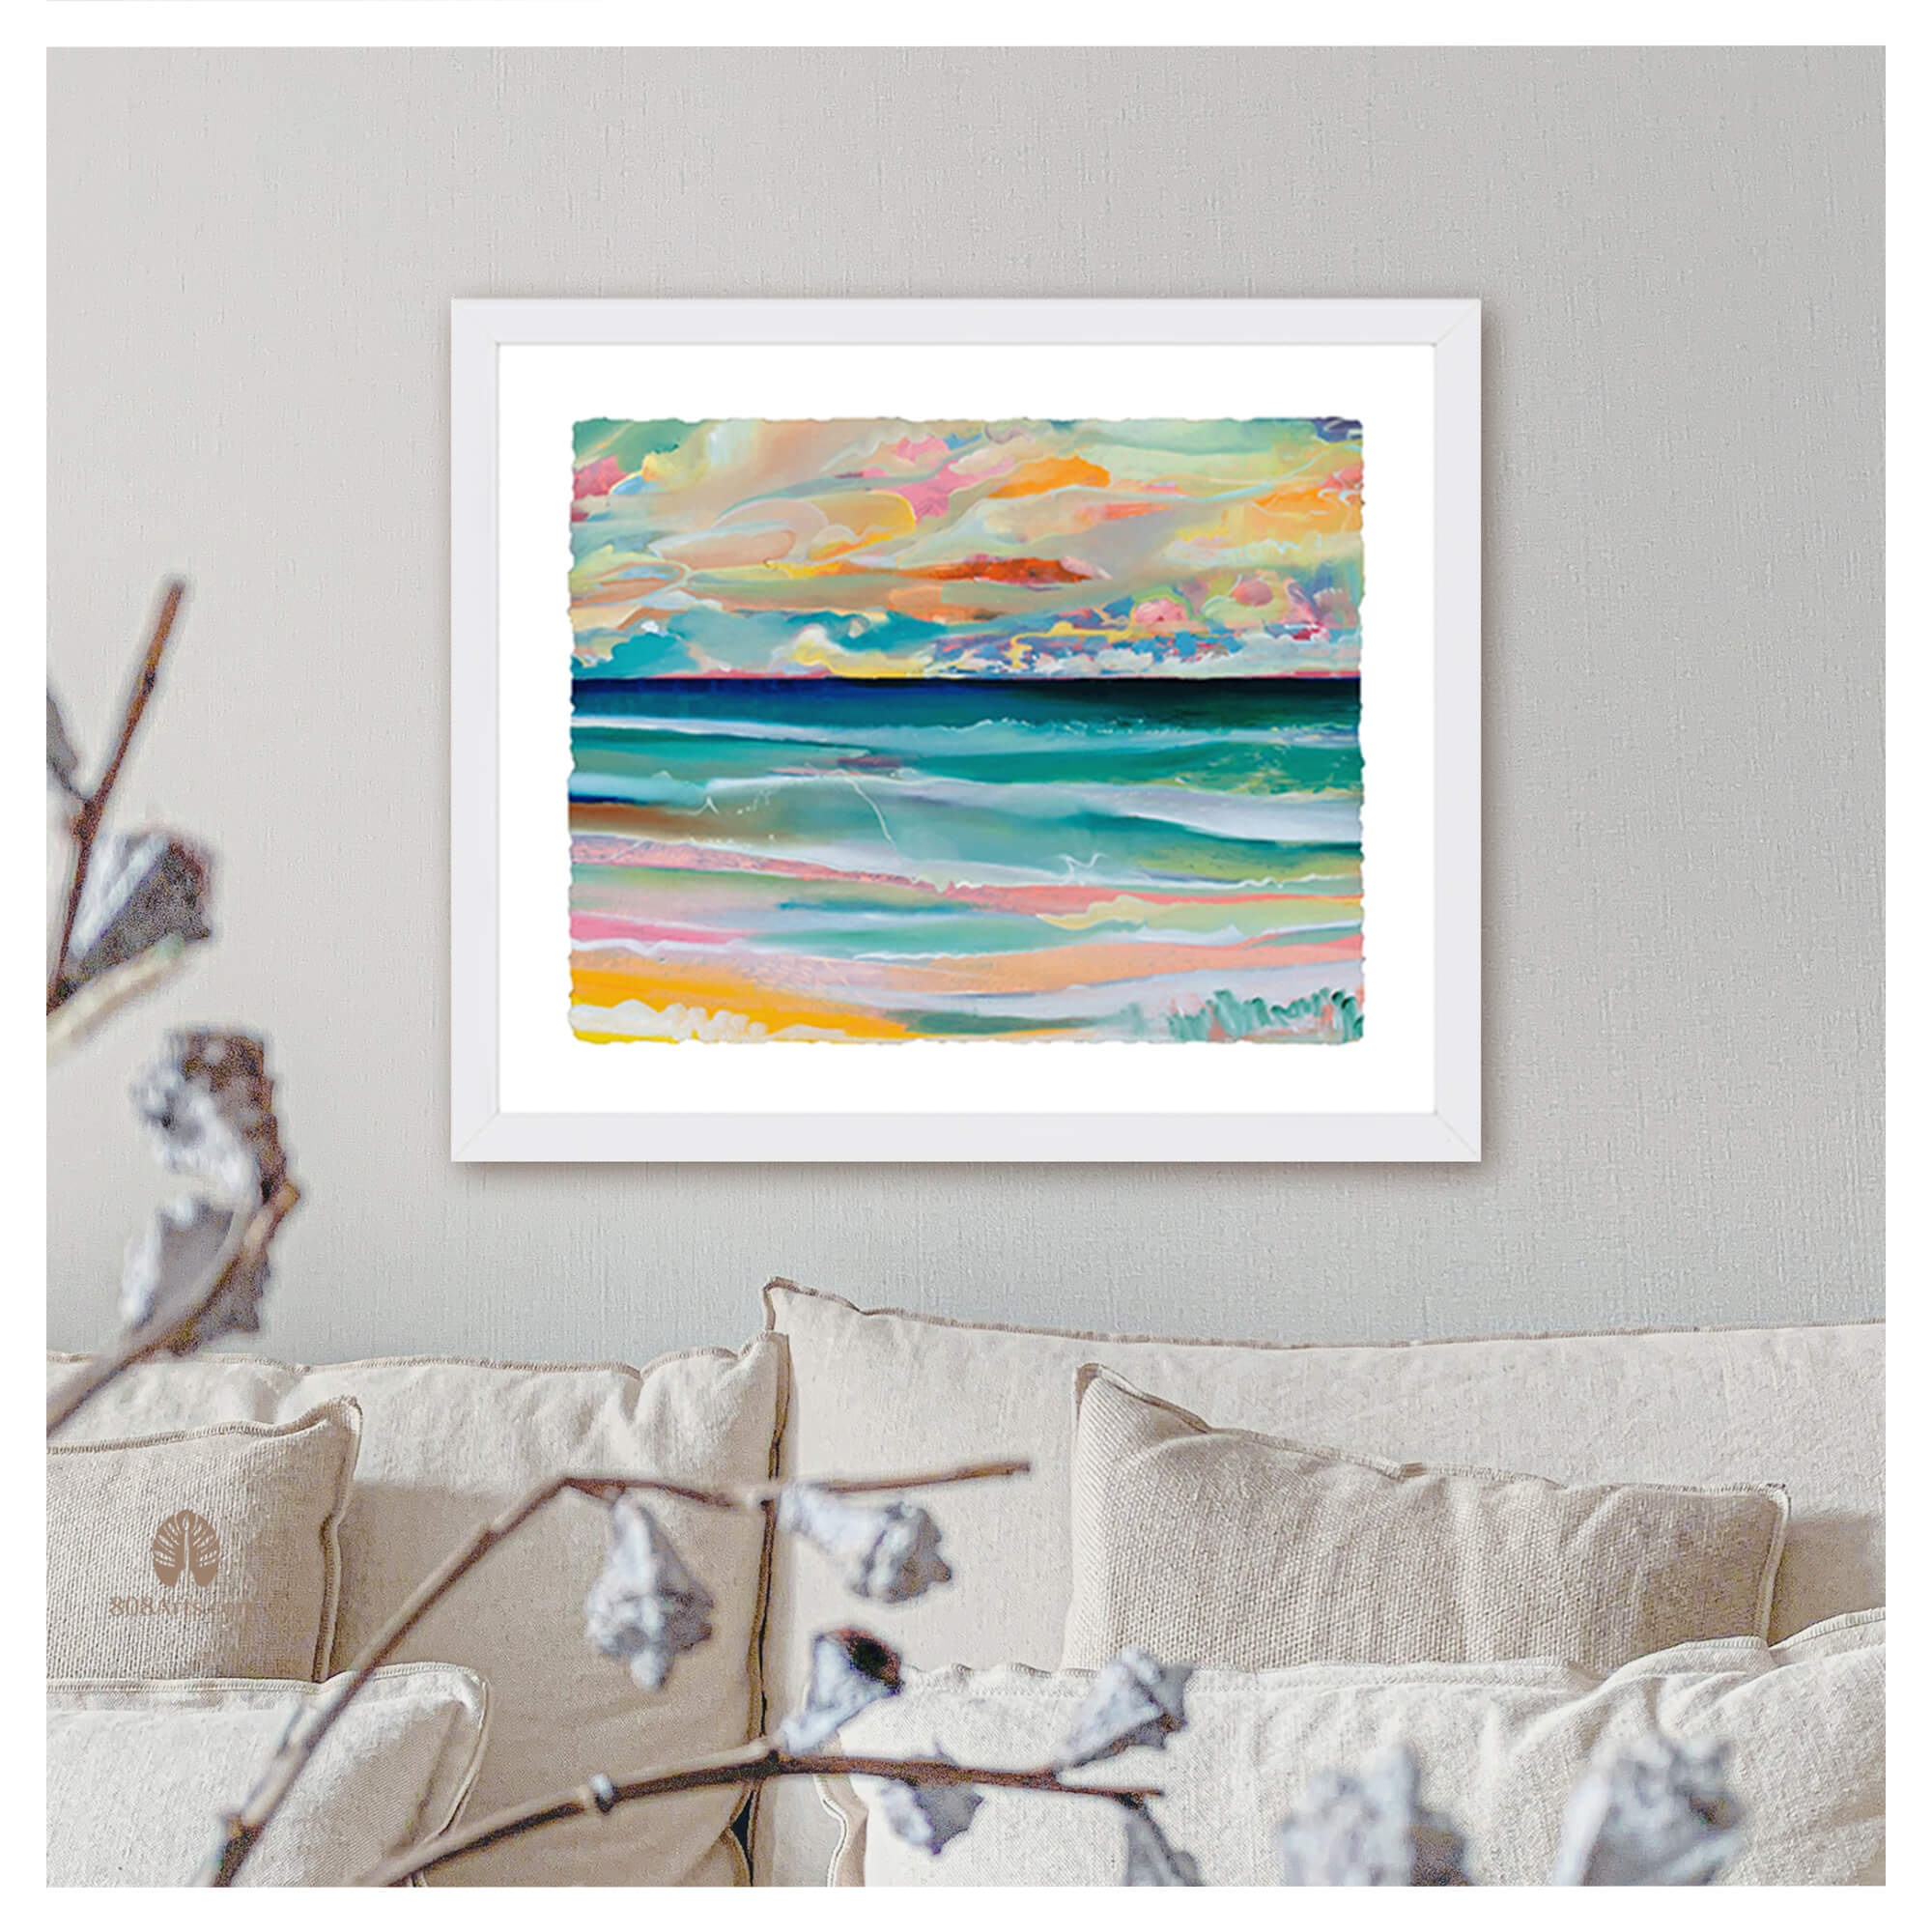 Framed paper art print of an abstract artwork of a seascape with pink, yellow and teal hues by Hawaii artist Saumolia Puapuaga